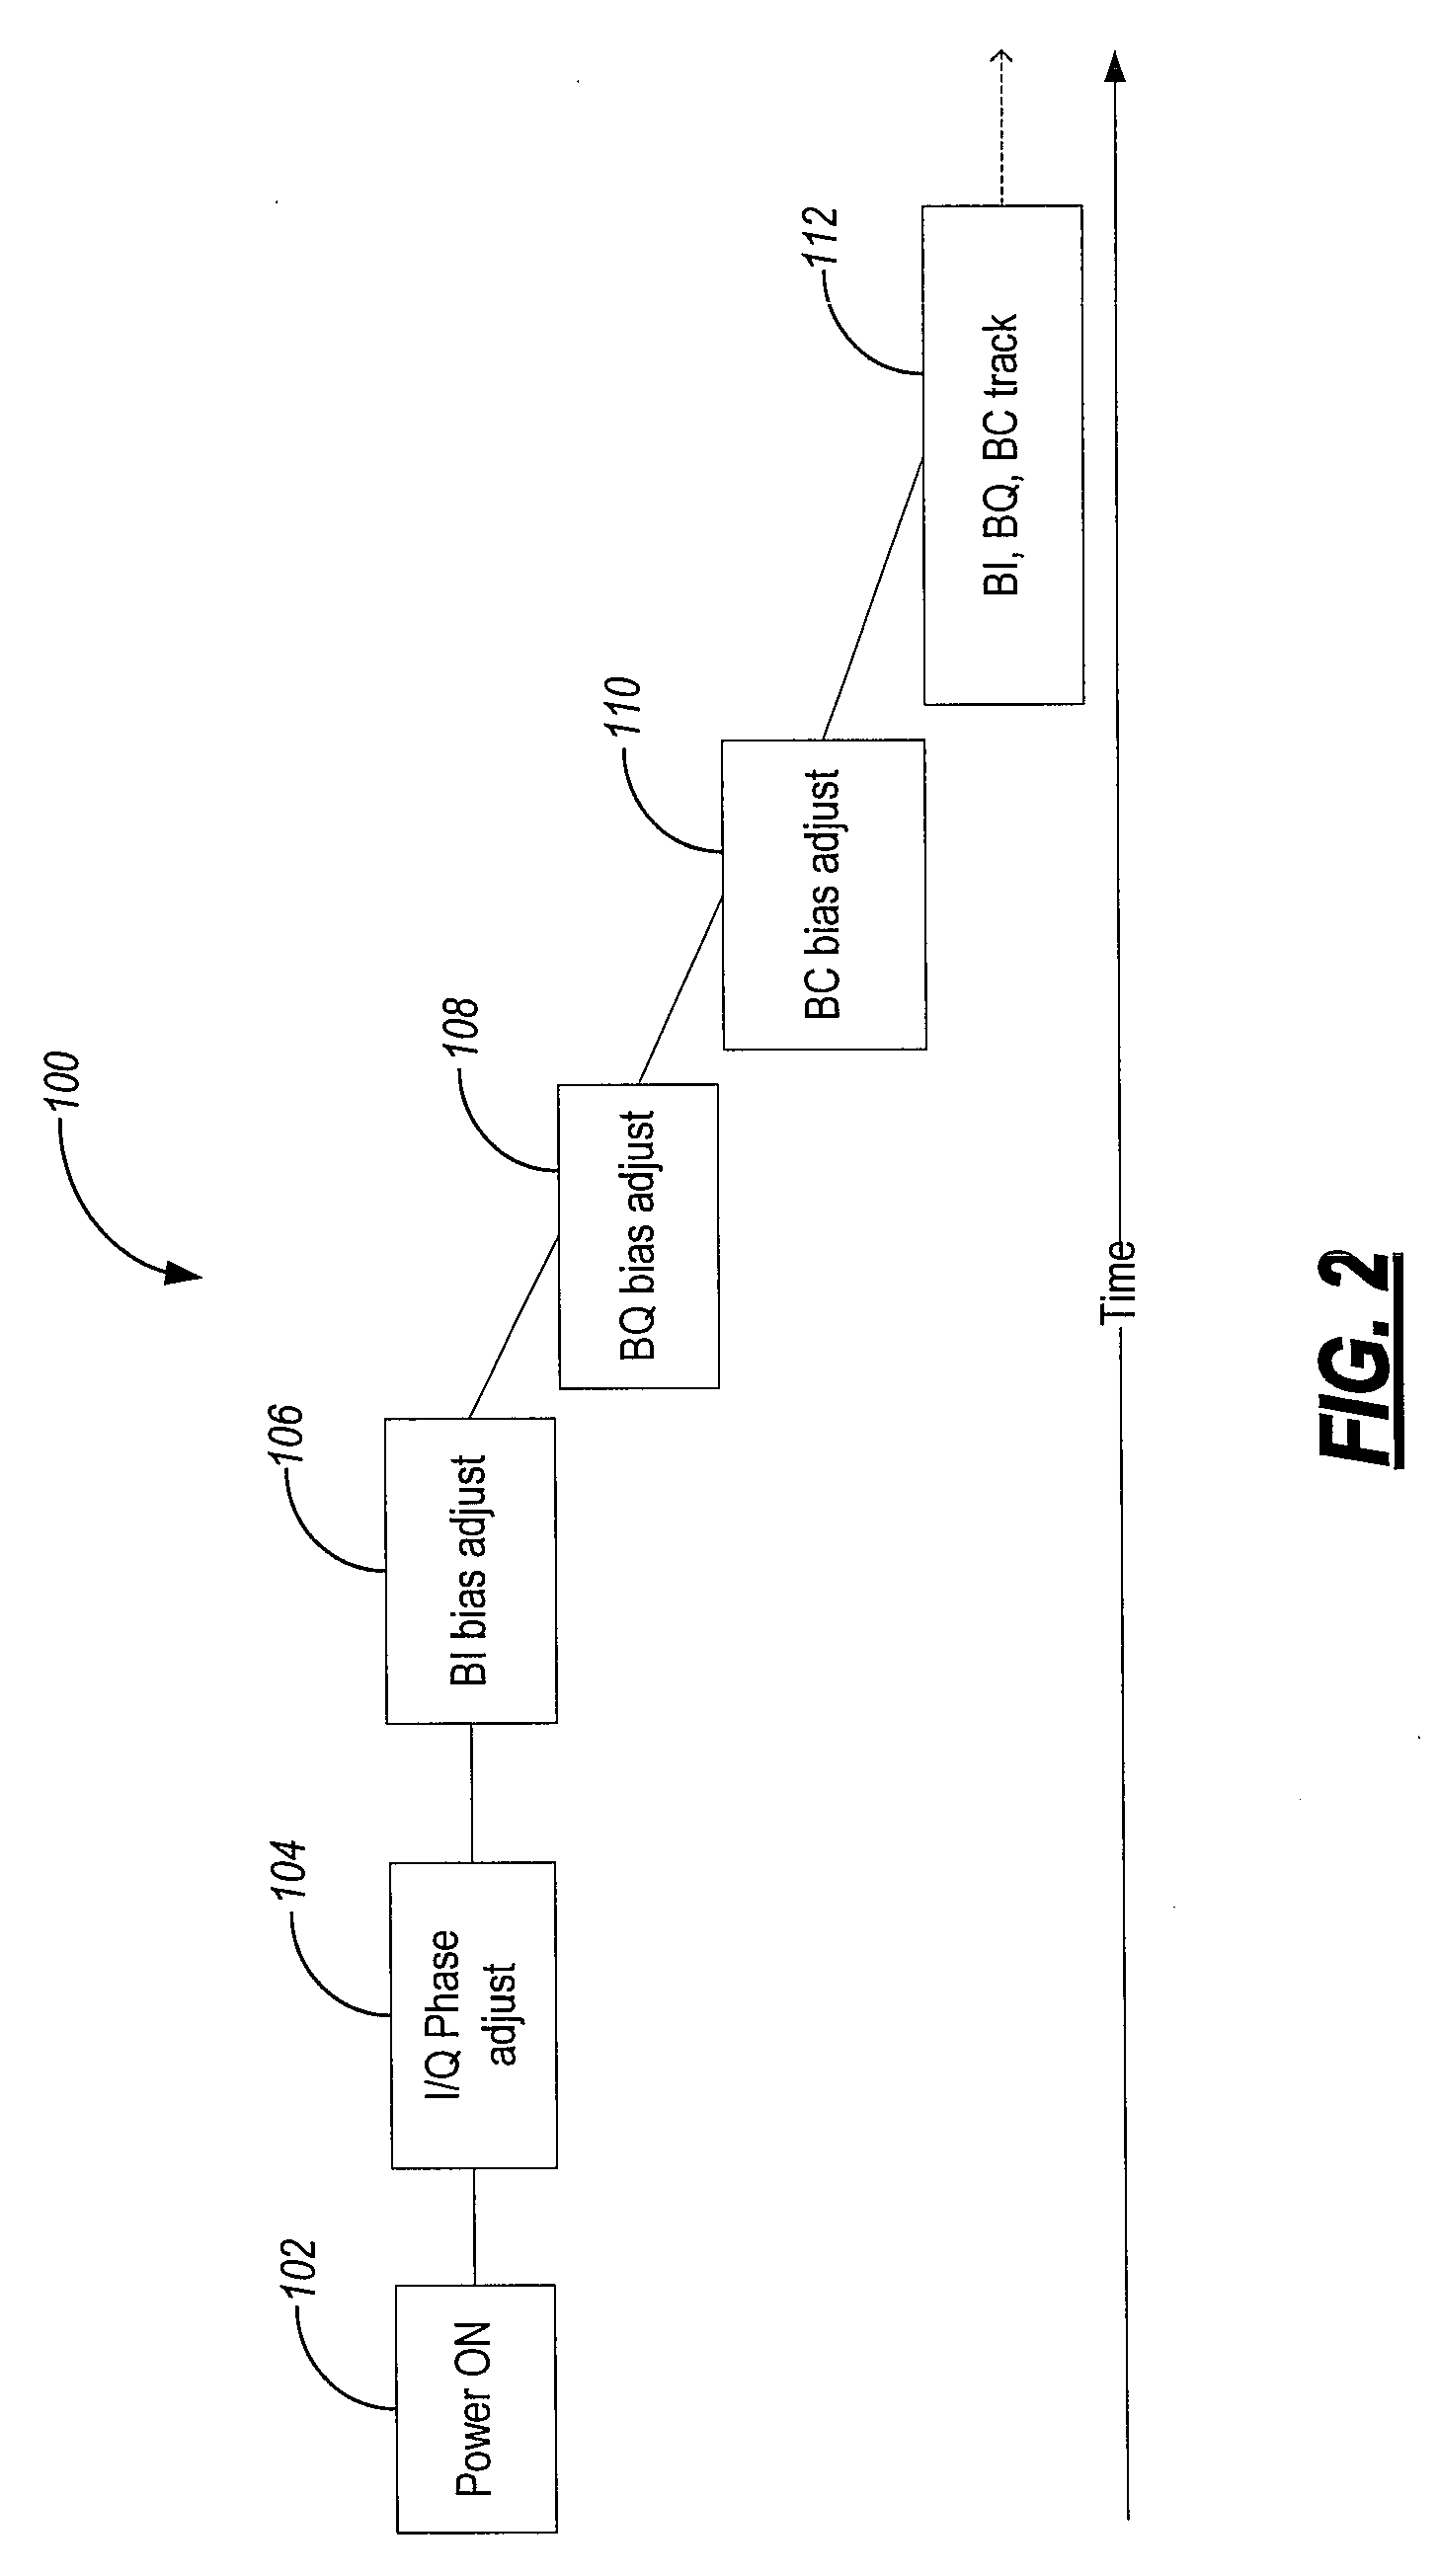 Systems and methods for dqpsk modulator control using selectively inserted dither tone